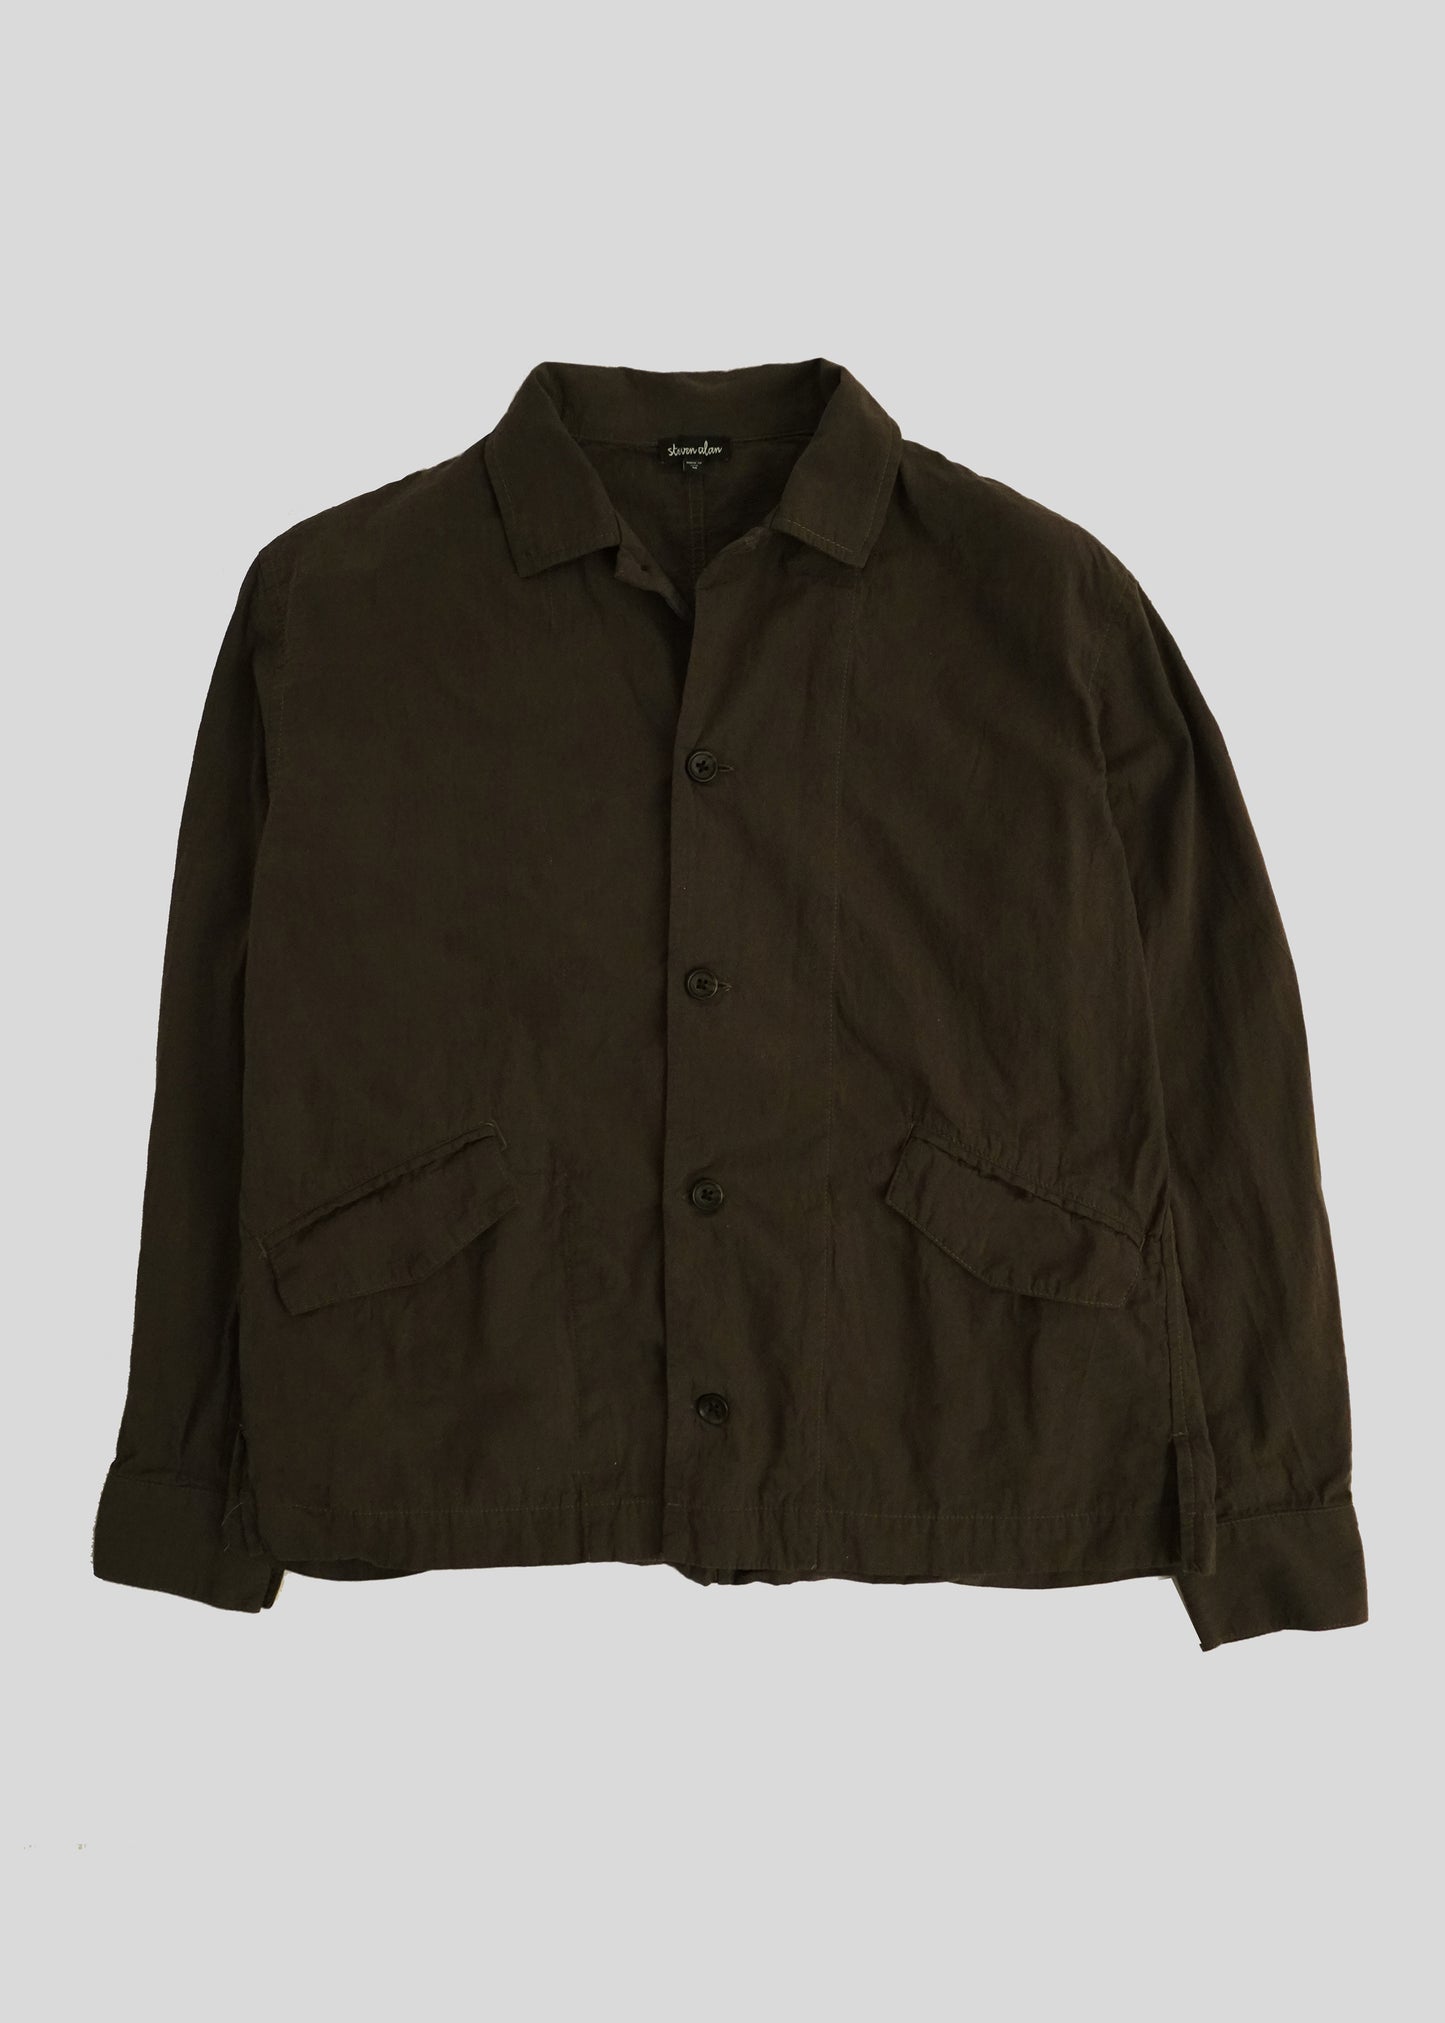 Painter Shirt in color dark green flat lay front